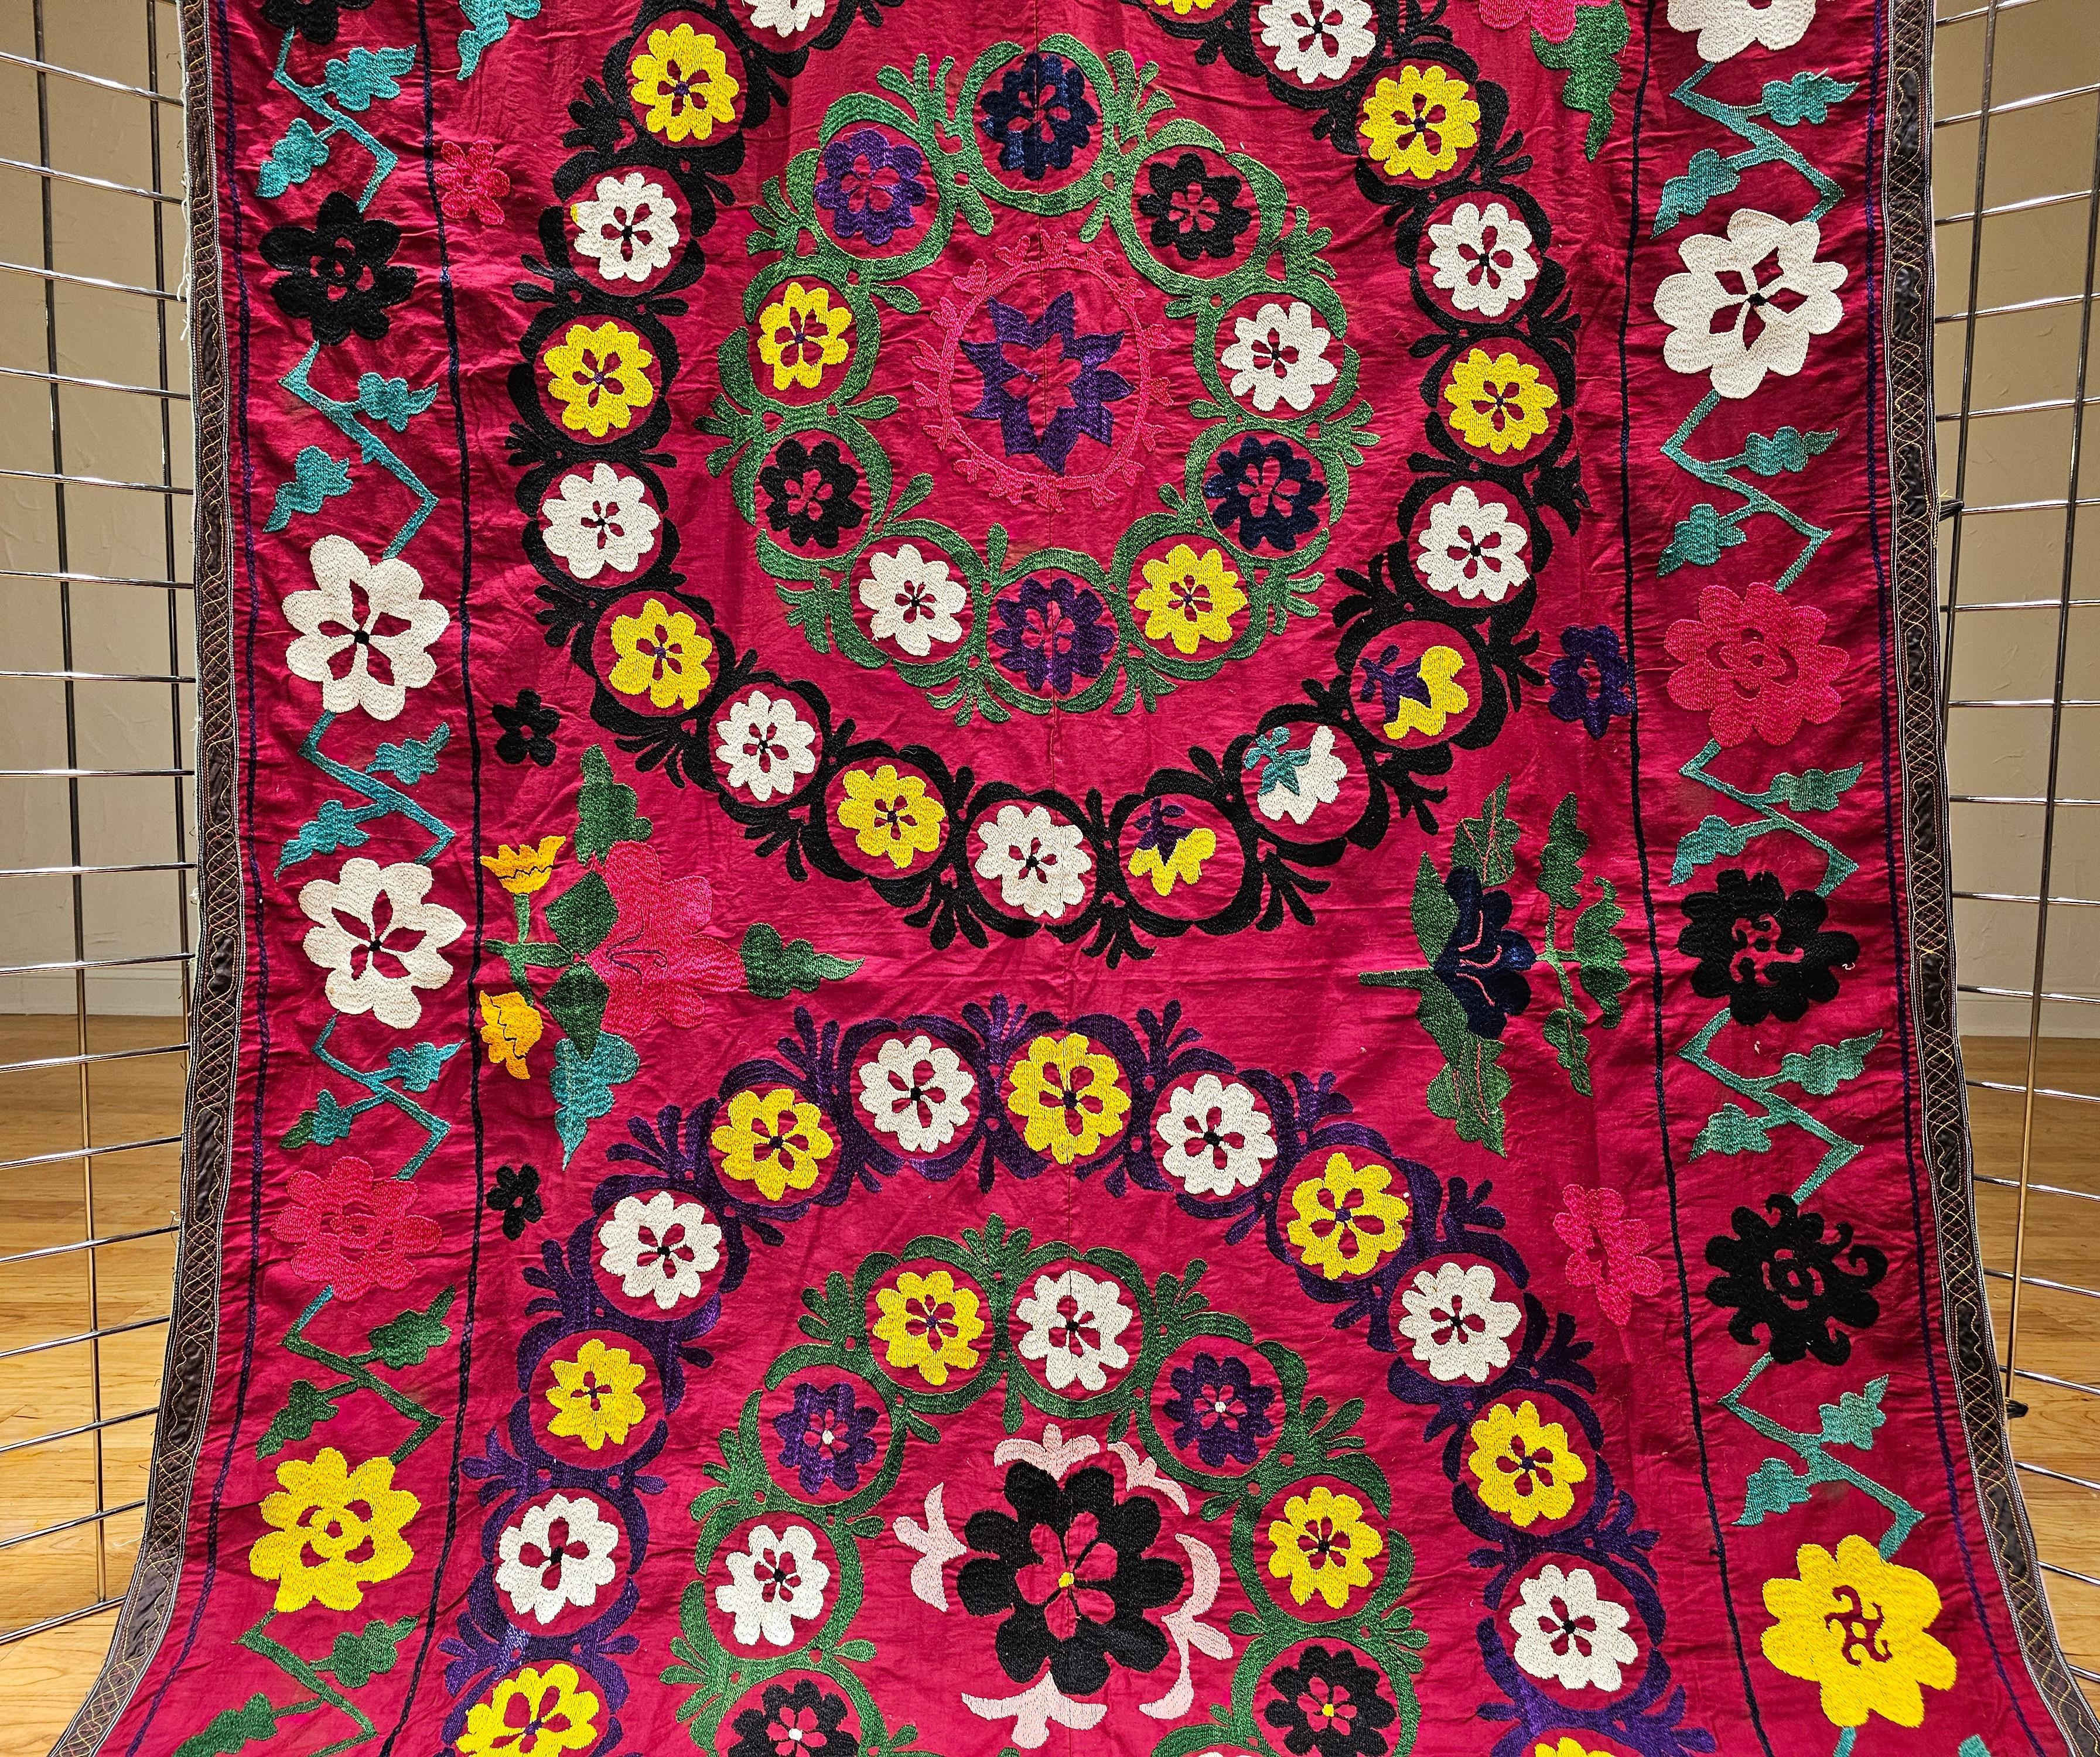 Vintage Uzbek Silk Embroidery Suzani in Crimson, Green, Ivory, Yellow, Purple In Good Condition For Sale In Barrington, IL